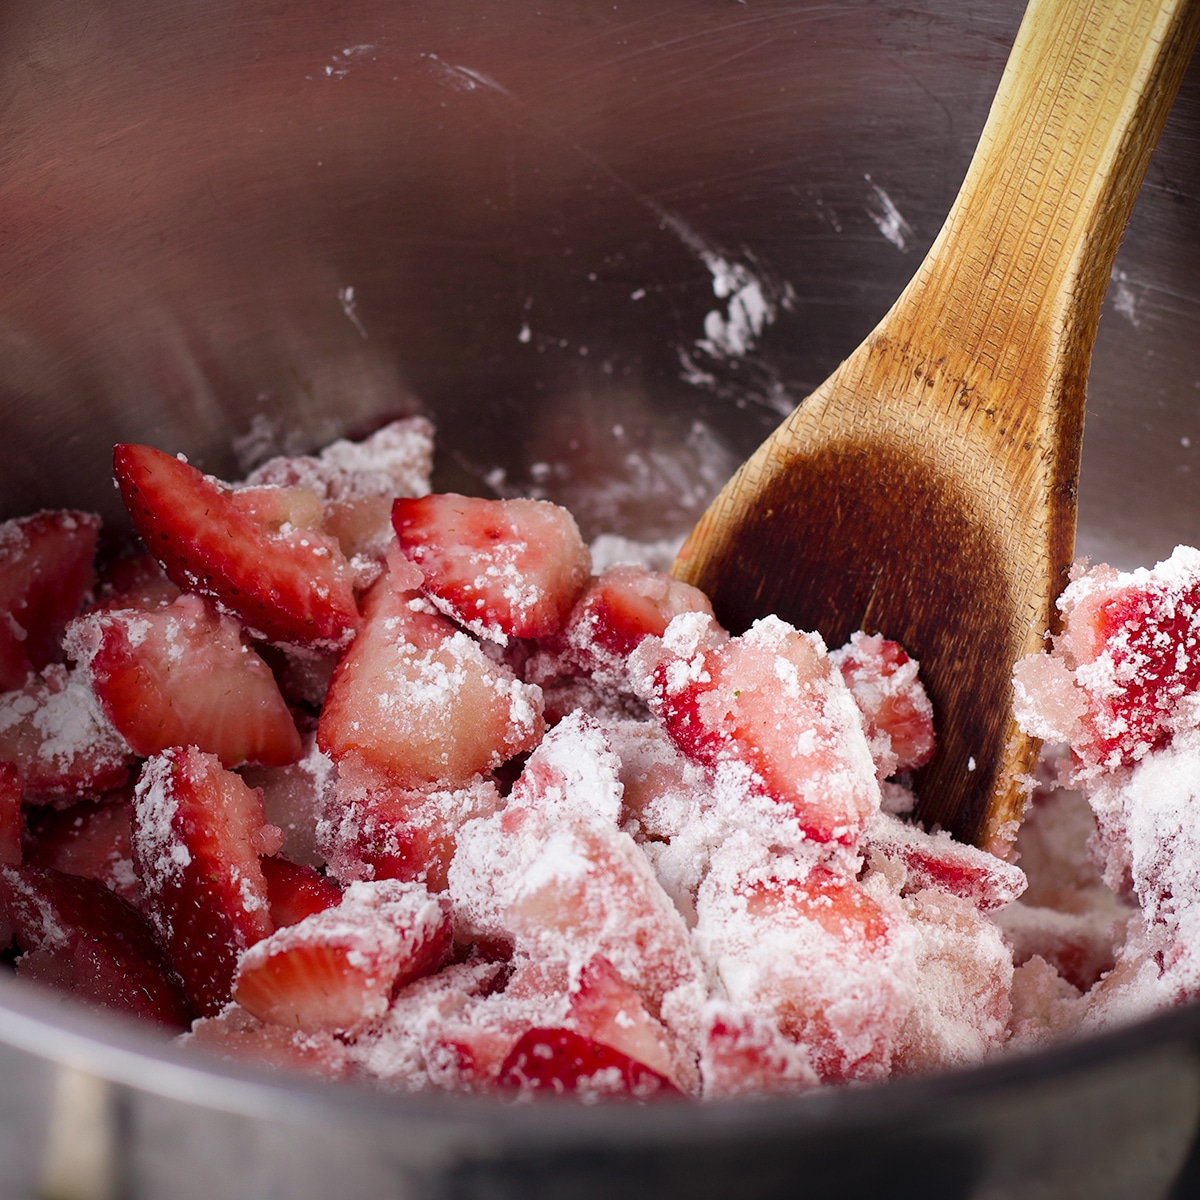 Someone using a wooden spoon to stir the ingredients for strawberry pie filling in a large saucepan.